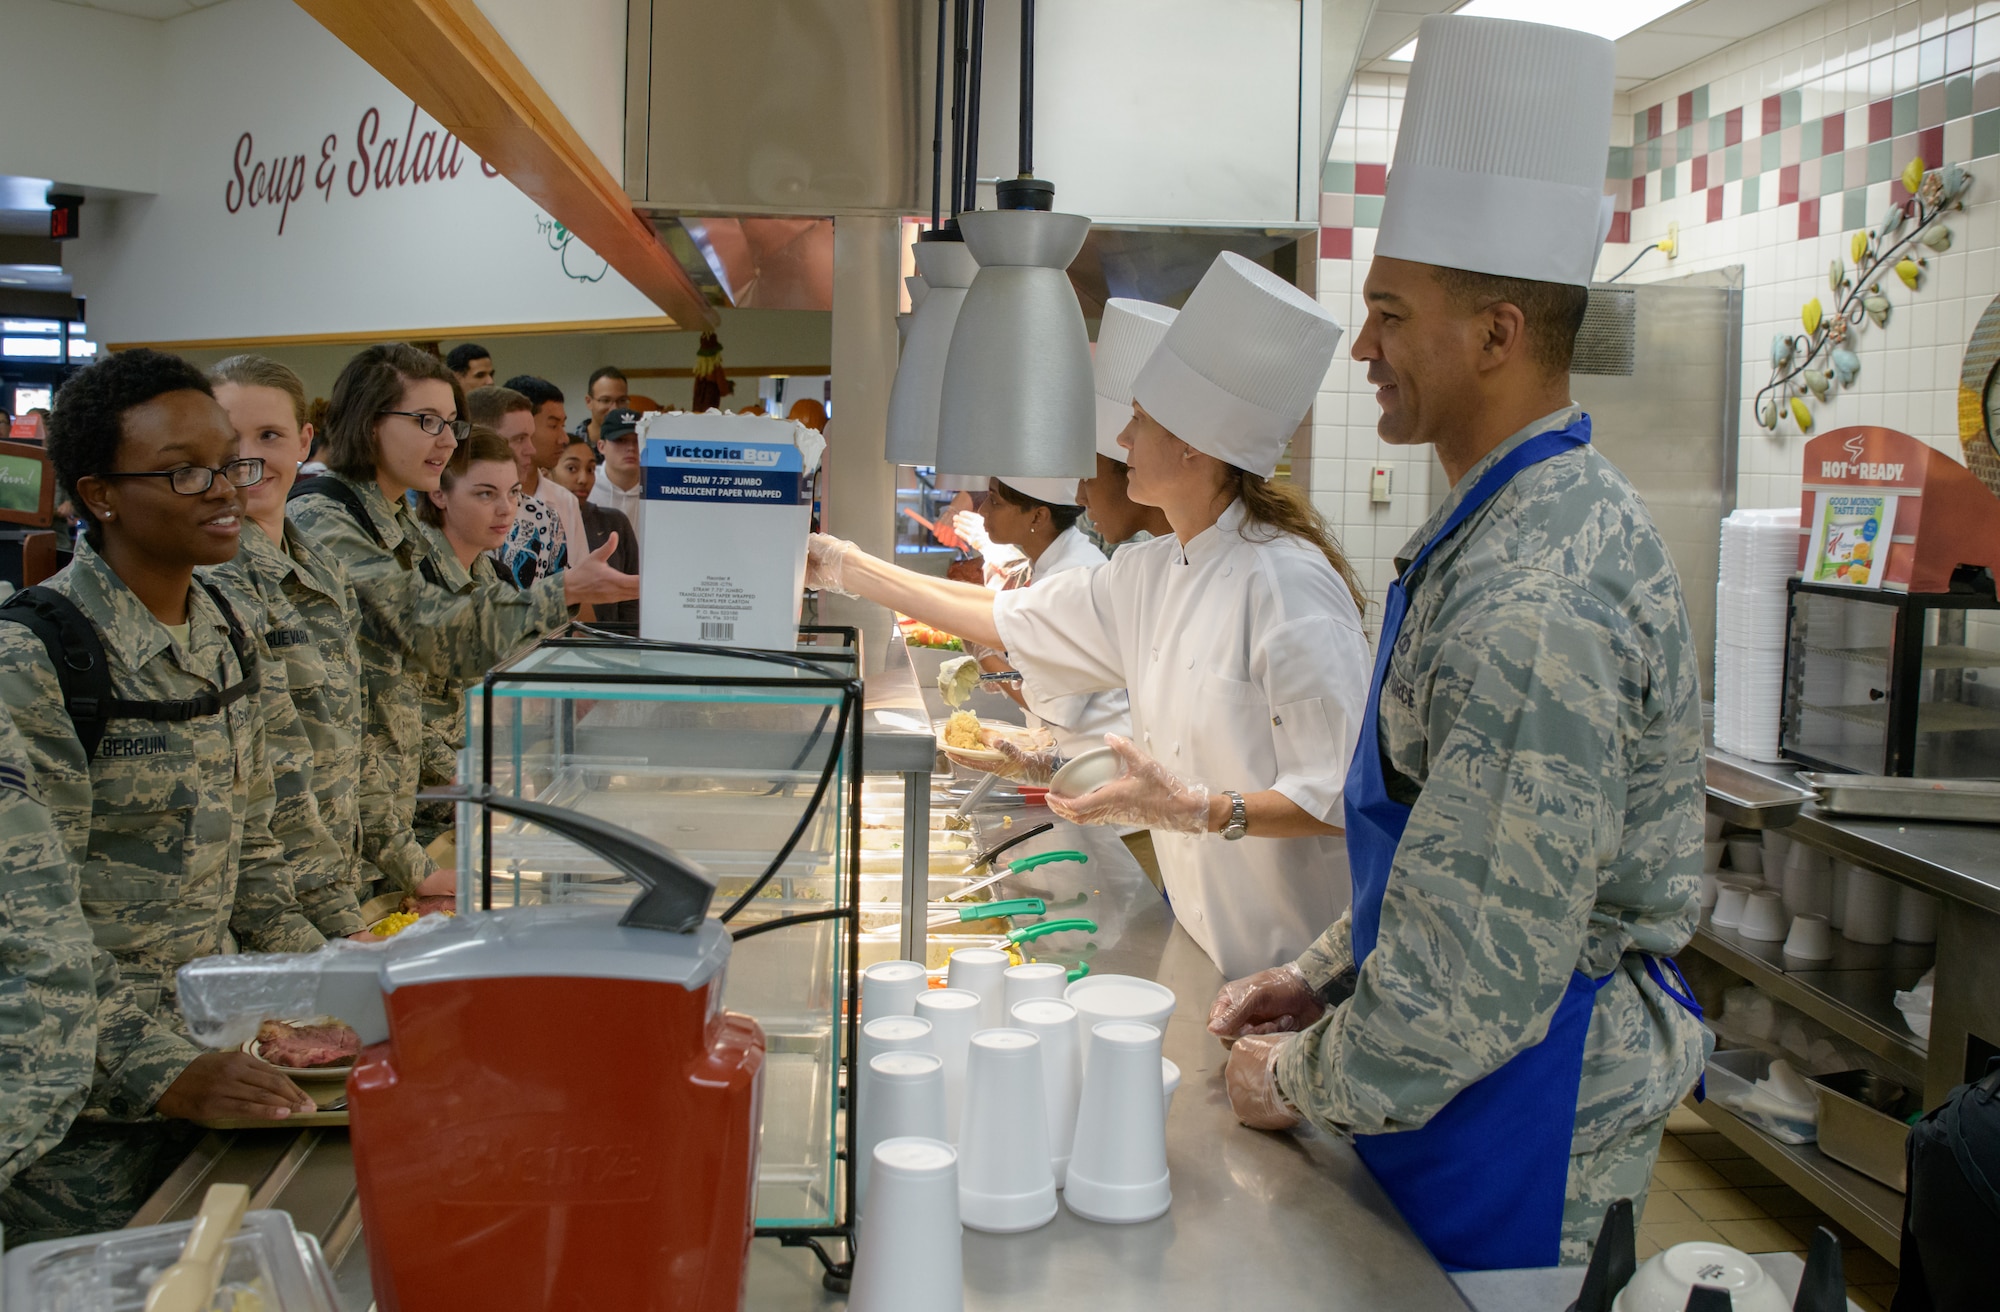 Keesler Air Force Base leadership serves Thanksgiving Day lunch to service members at the Azalea Dining Facility on Keesler Air Force Base, Mississippi, Nov. 22, 2018. It is tradition at Keesler for commanders, first sergeants and superintendents to take time out of their holiday to serve a Thanksgiving meal at the dining facilities to technical training and permanent party Airmen. (U.S. Air Force photo by Andre' Askew)